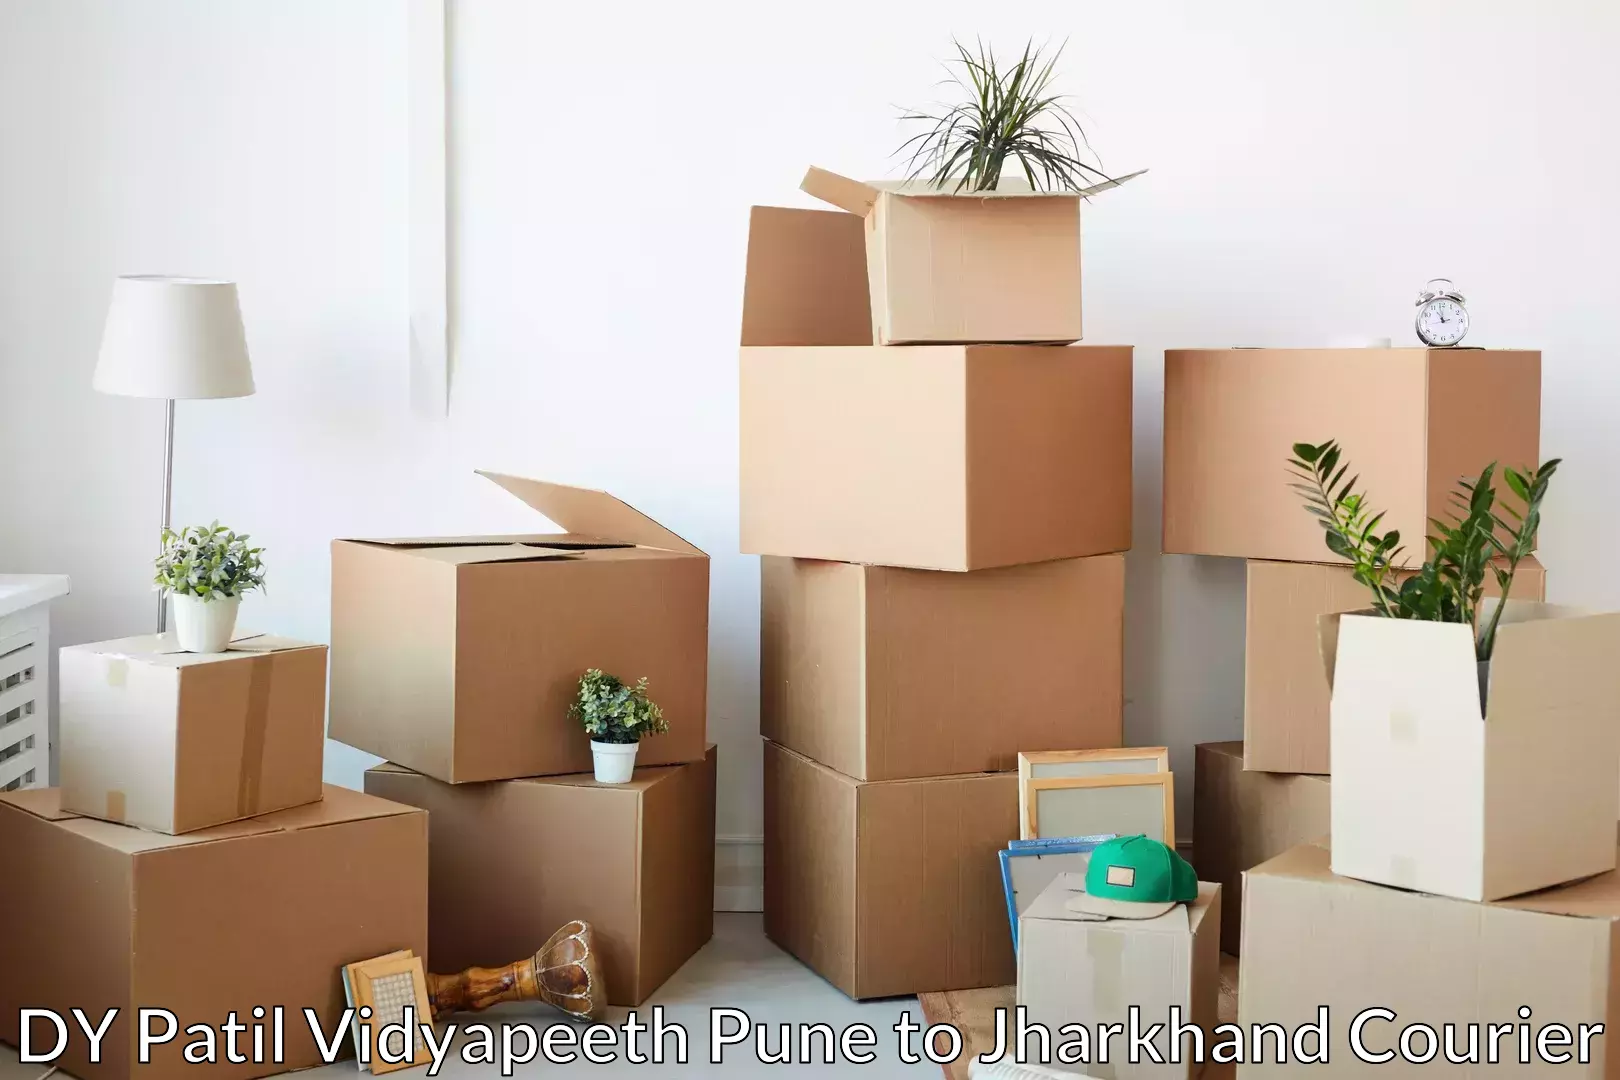 Comprehensive moving assistance DY Patil Vidyapeeth Pune to Jharkhand